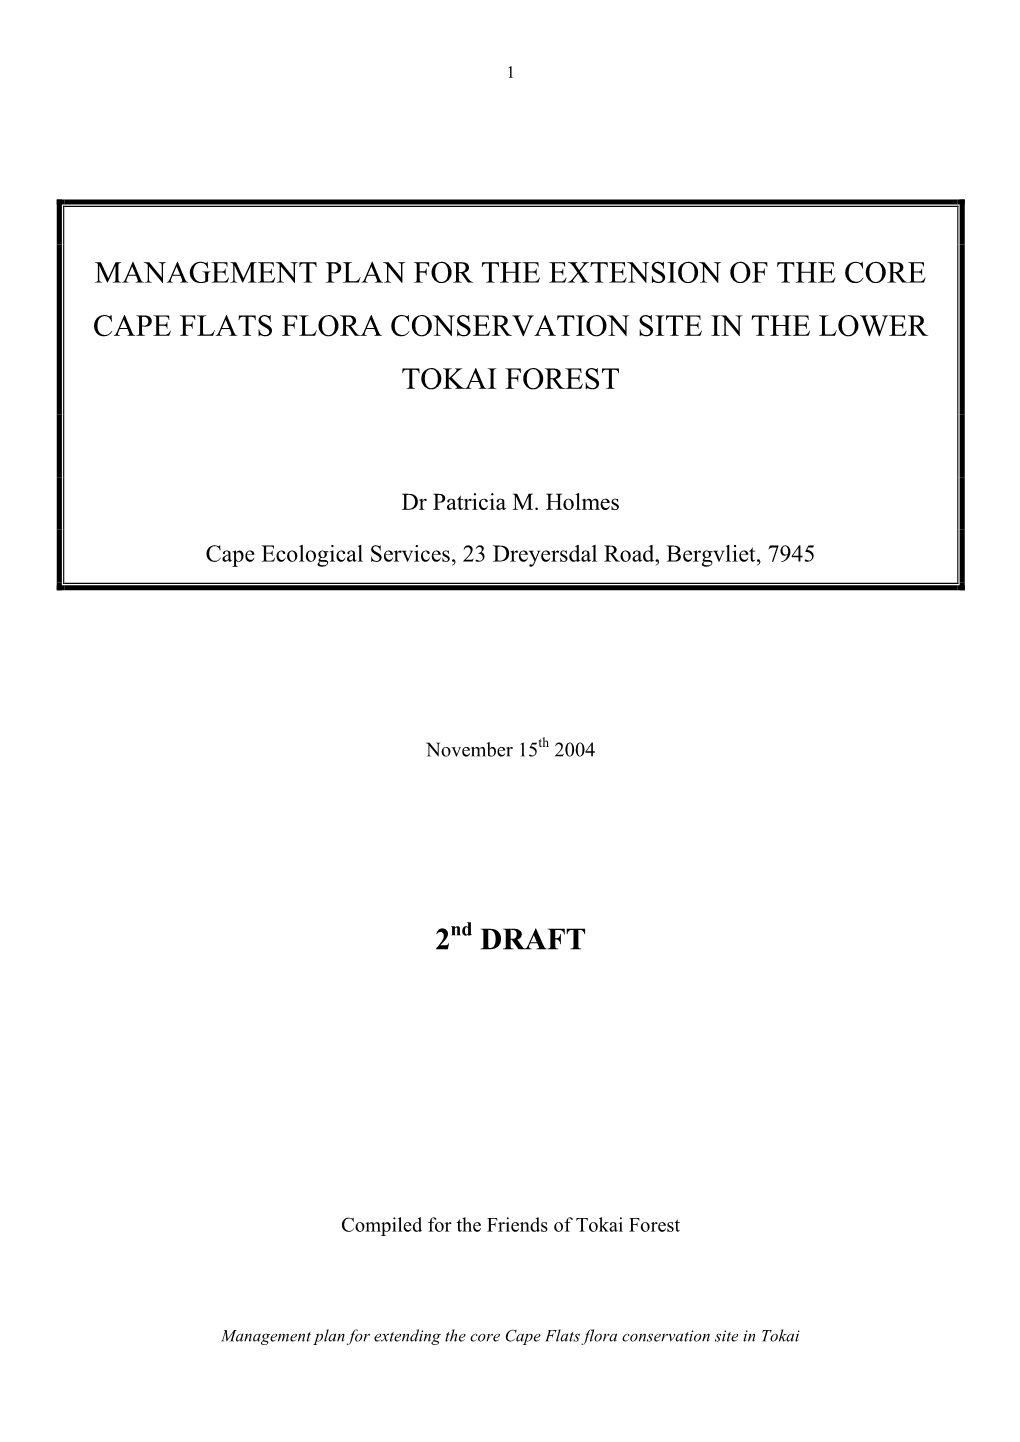 Management Plan for the Extension of the Core Cape Flats Flora Conservation Site in the Lower Tokai Forest